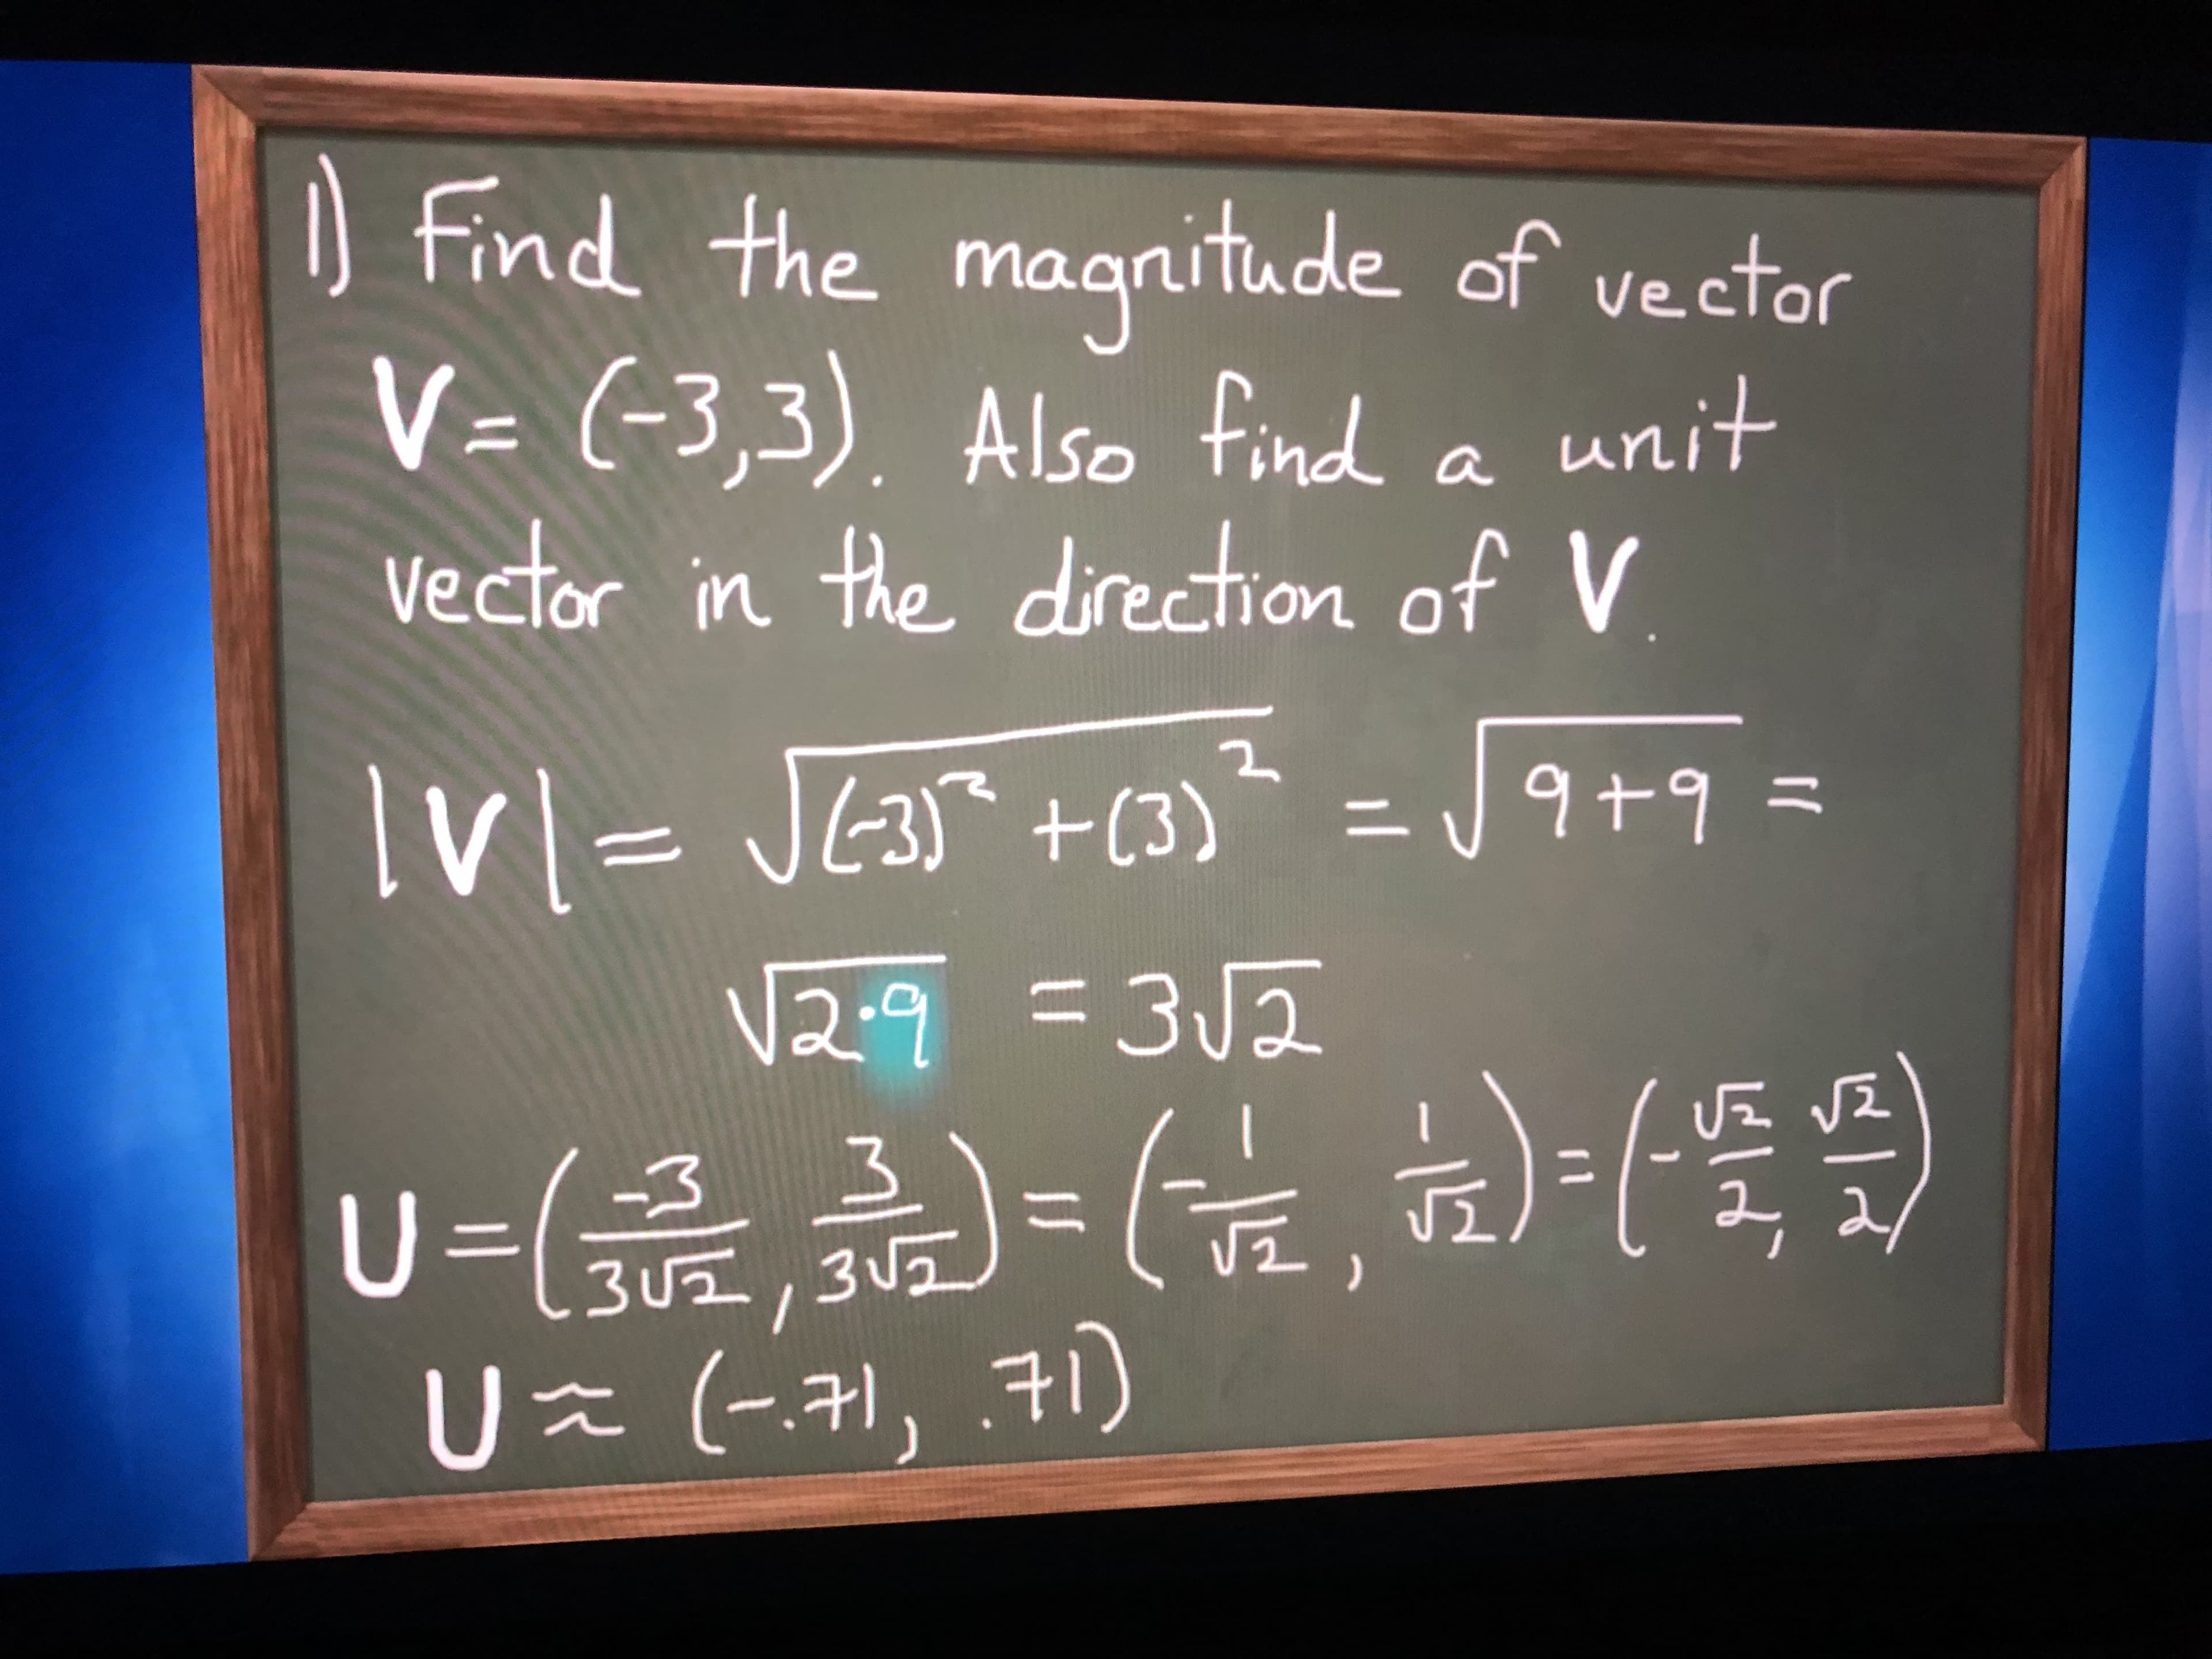 D Find the magnitude of vector
V= (-3,3). Also find a unit
vector in the direction of V
-19+9
9+9%=
Iyl= JE3 +(3)* = J 9+9=
%3D
||
V2-9 =312
U-(금,-(, )-(뚝을)
Ux (-귀, 귀)
3U2
